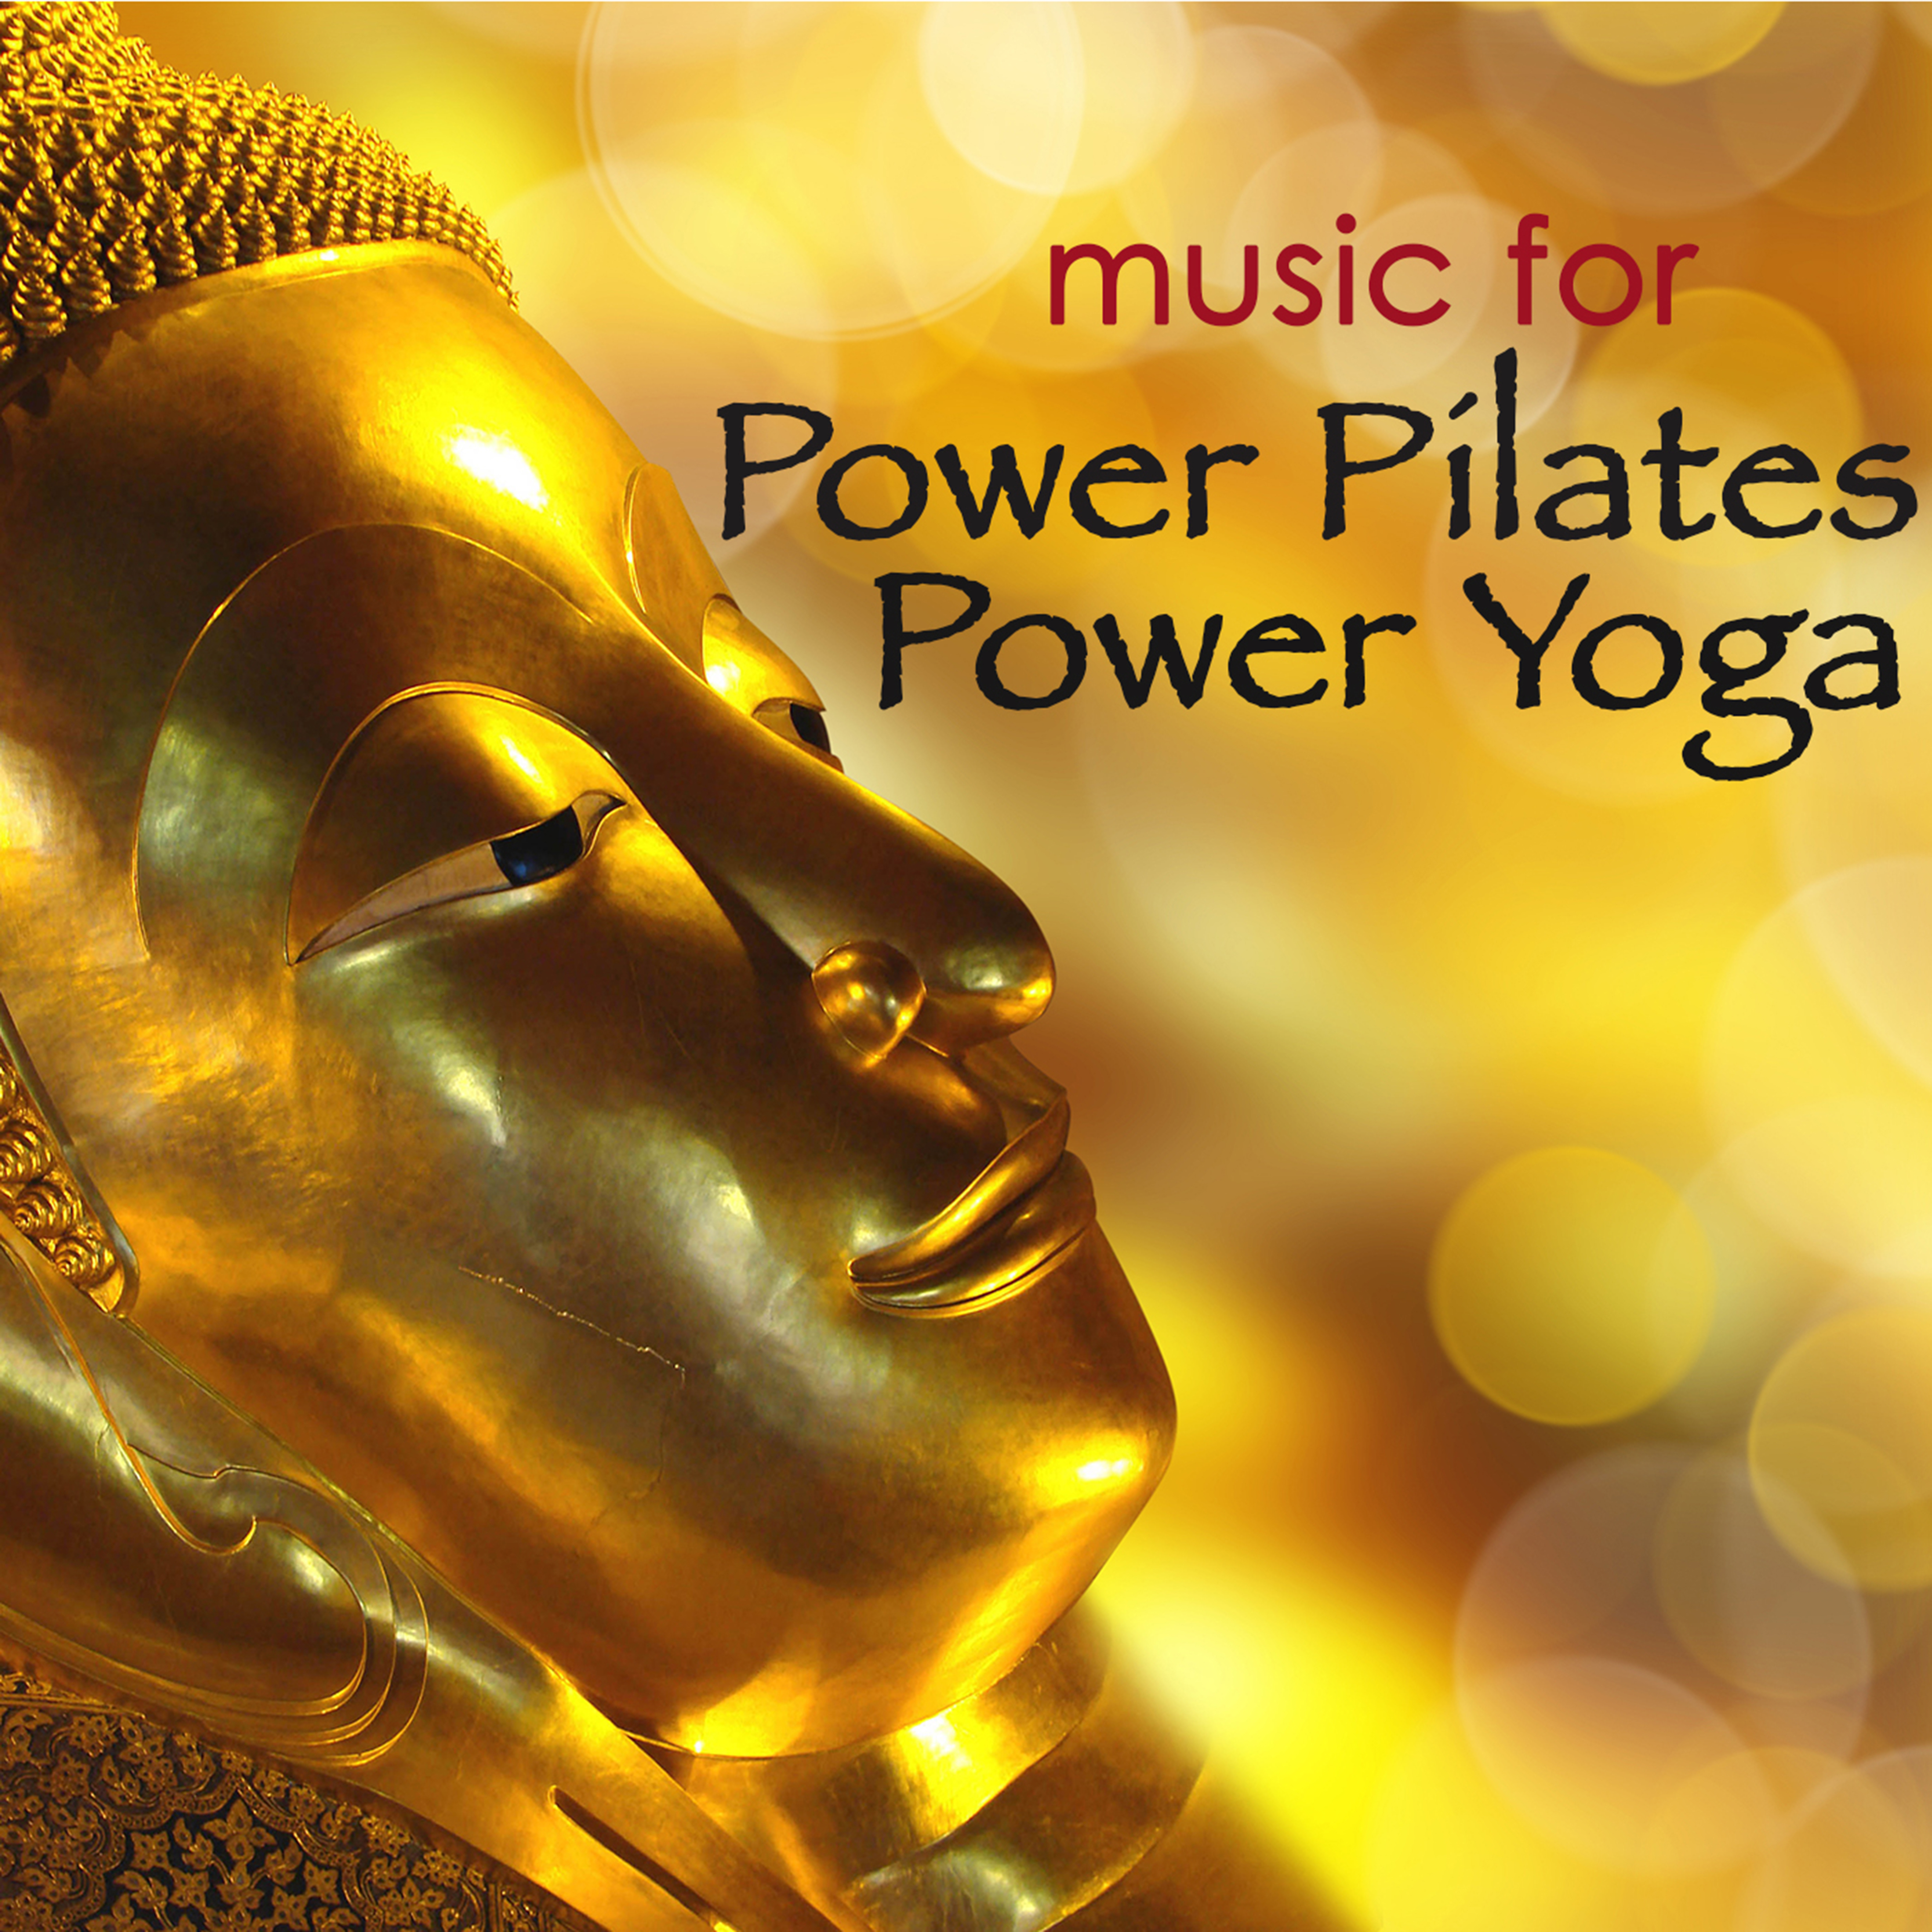 Music for Power Pilates & Power Yoga – Chillout World Music Lounge **** Songs for Pilates & Flow Yoga